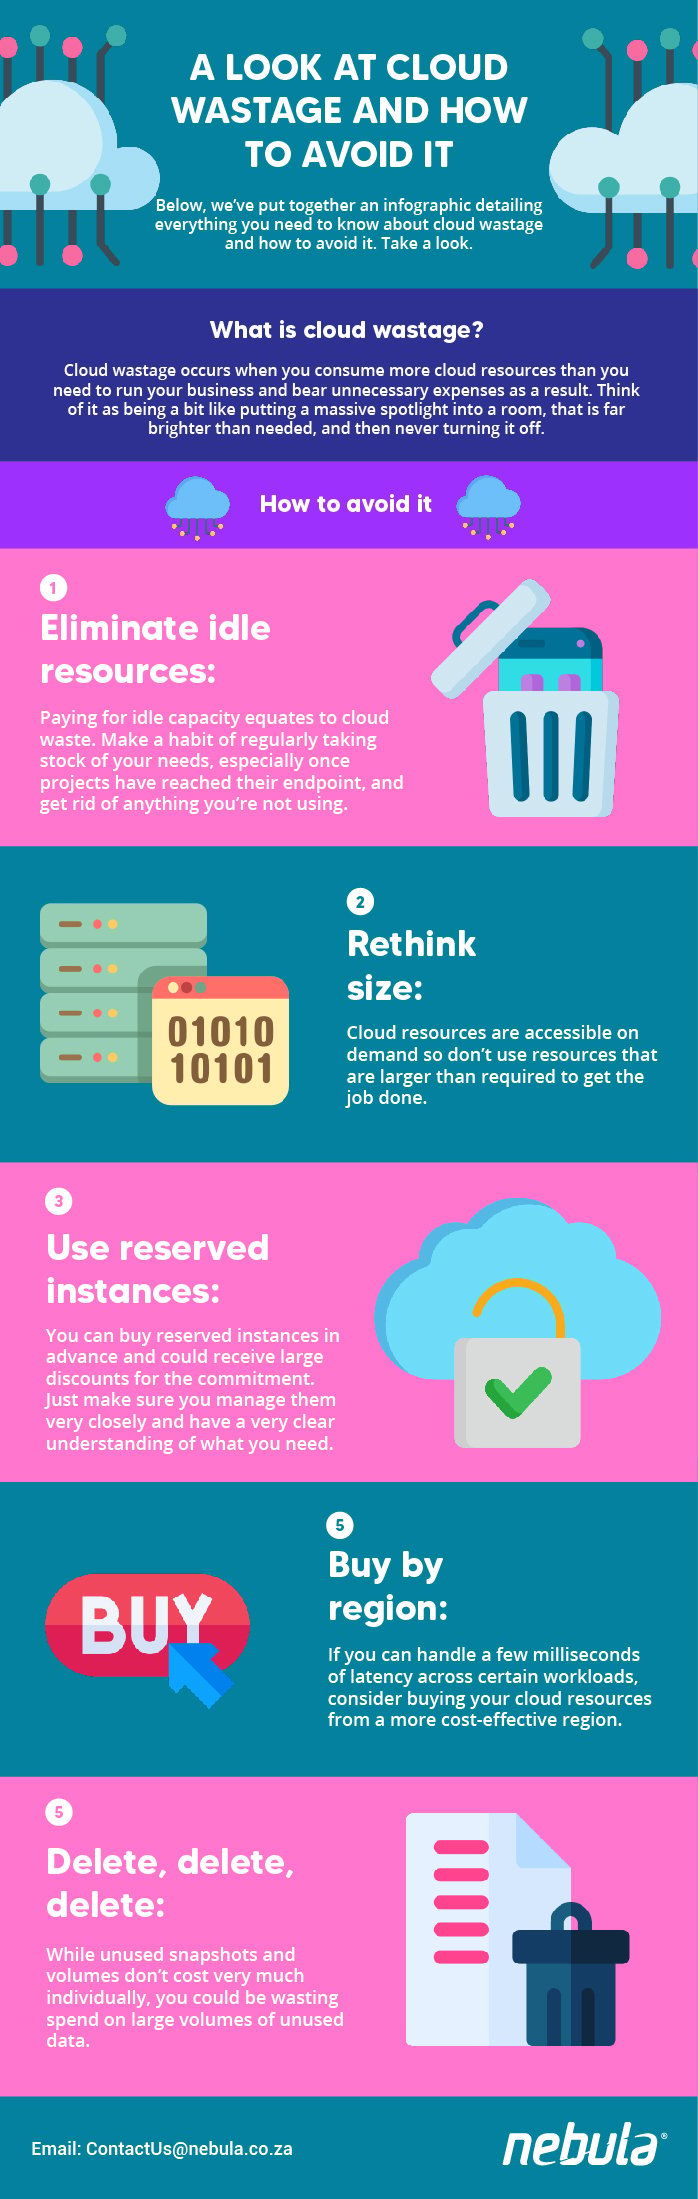 Cloud-wastage-infographic